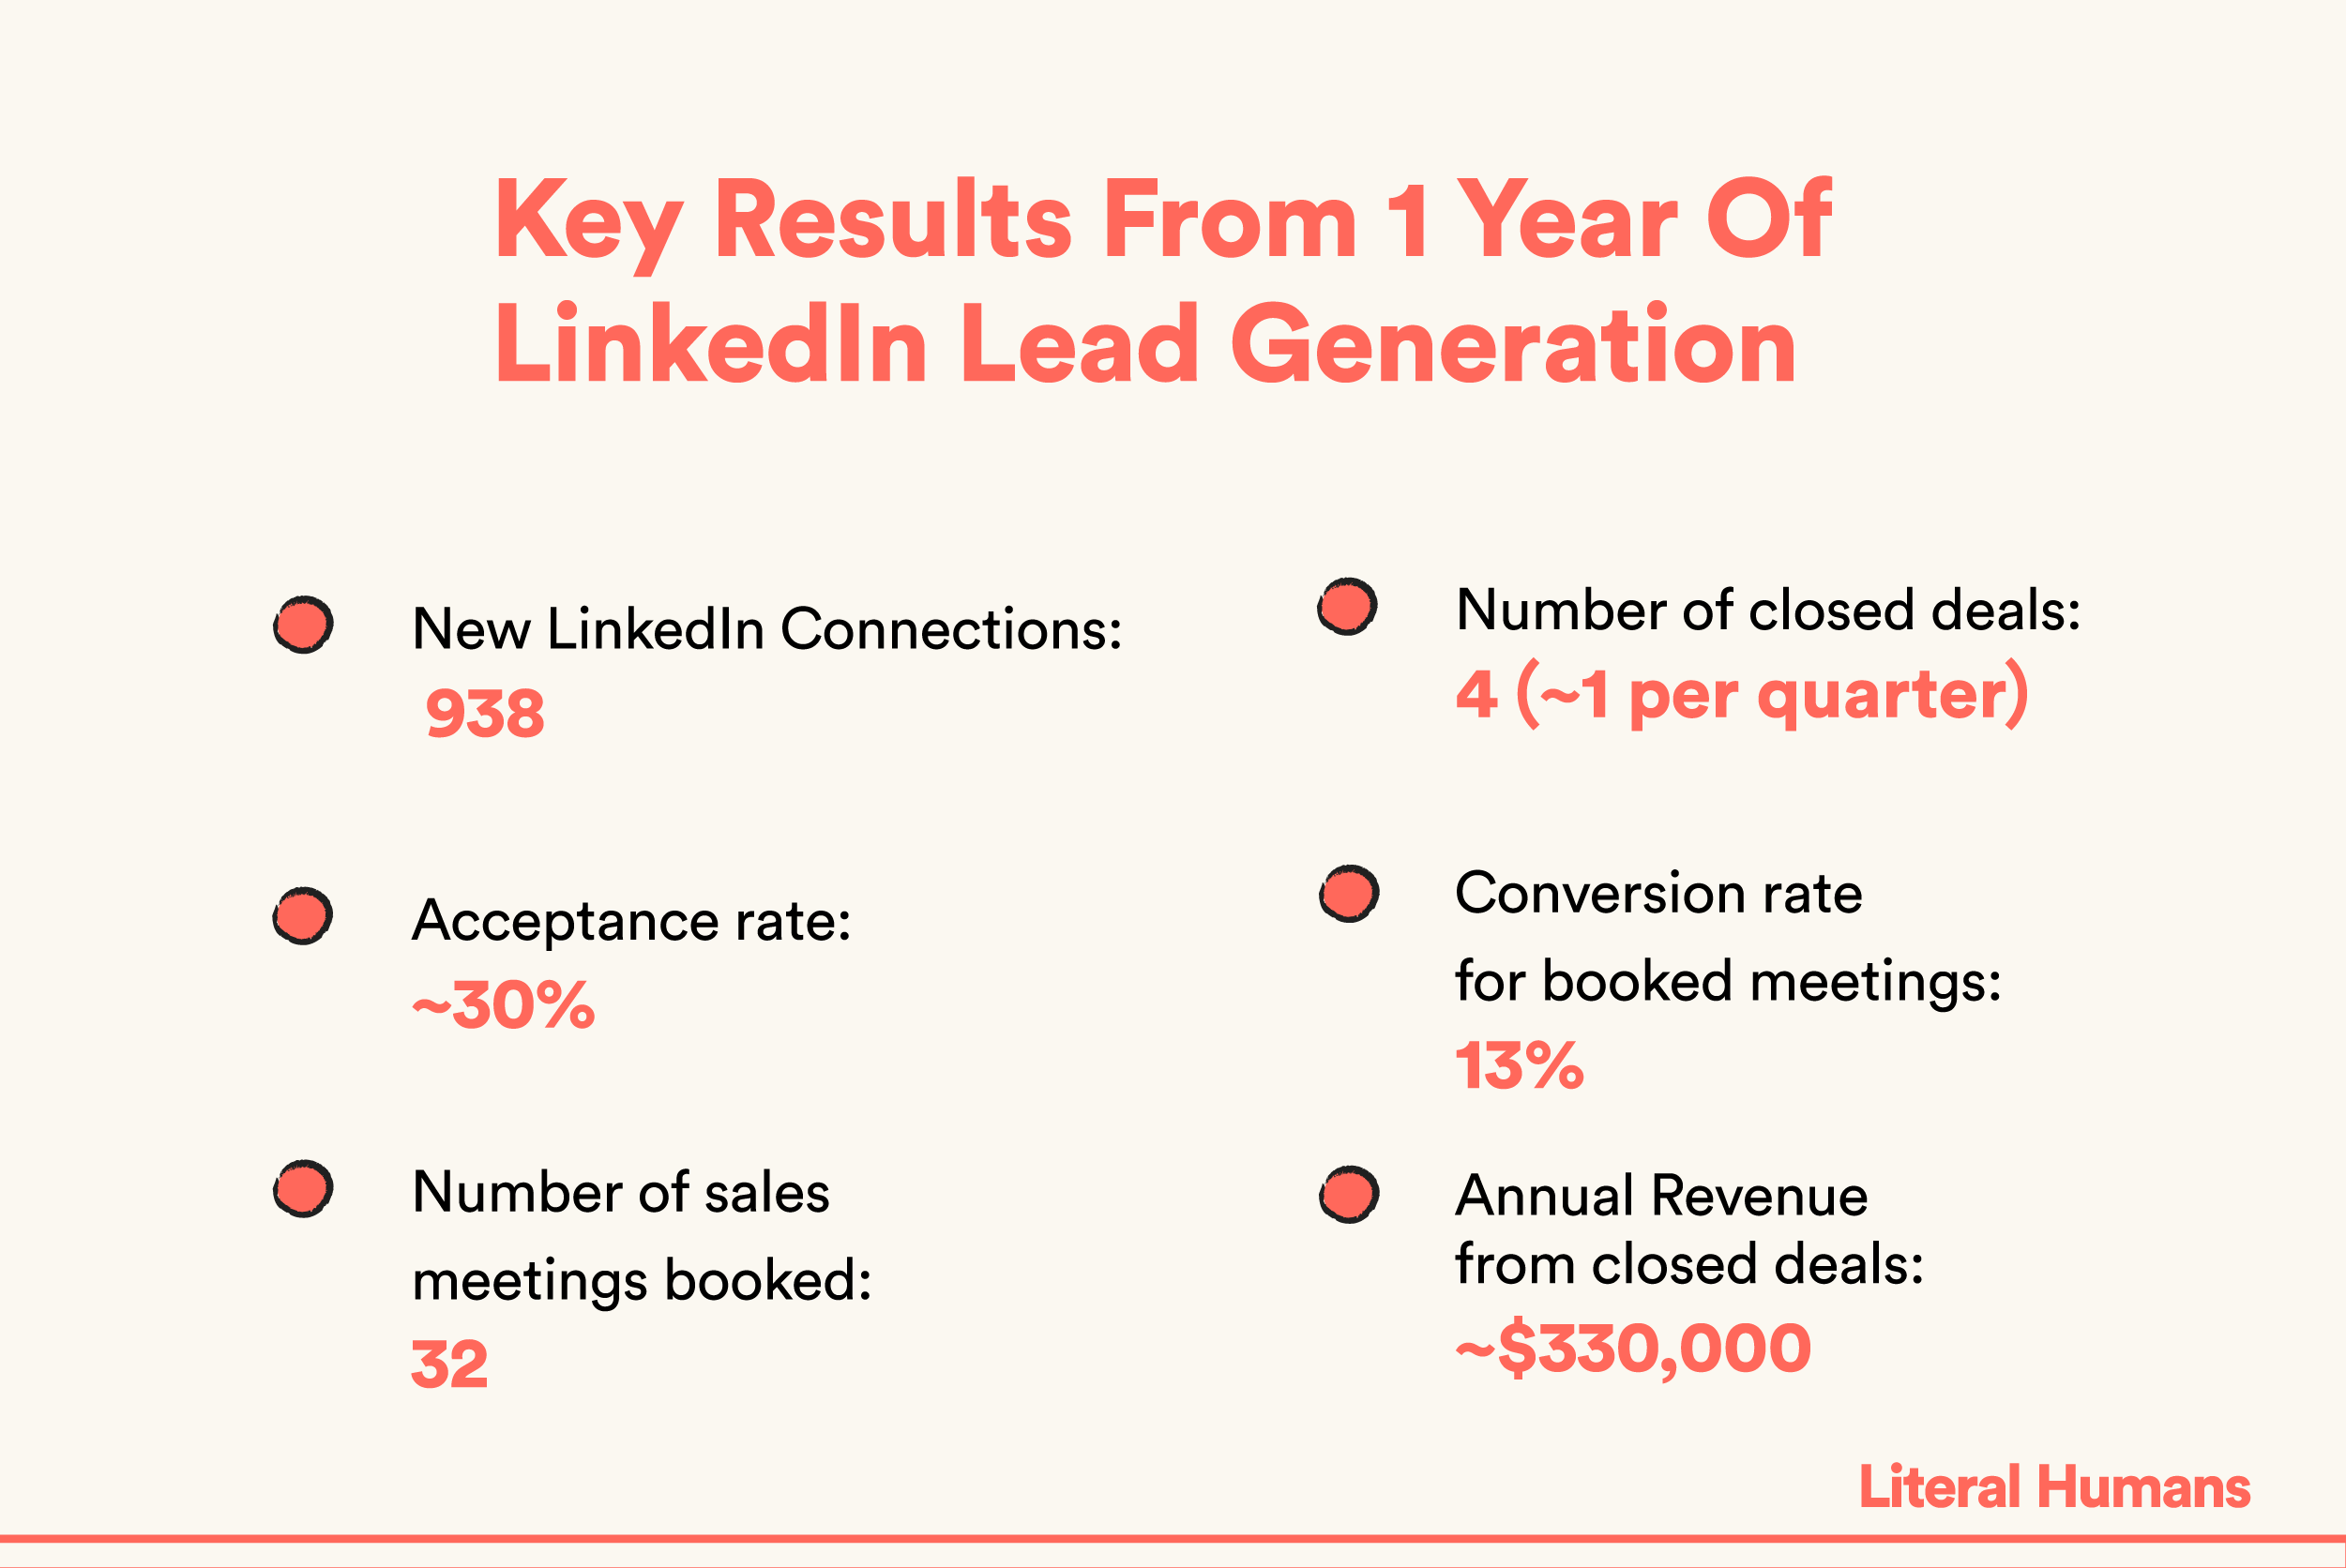 A set of results from a year of LinkedIn lead generation